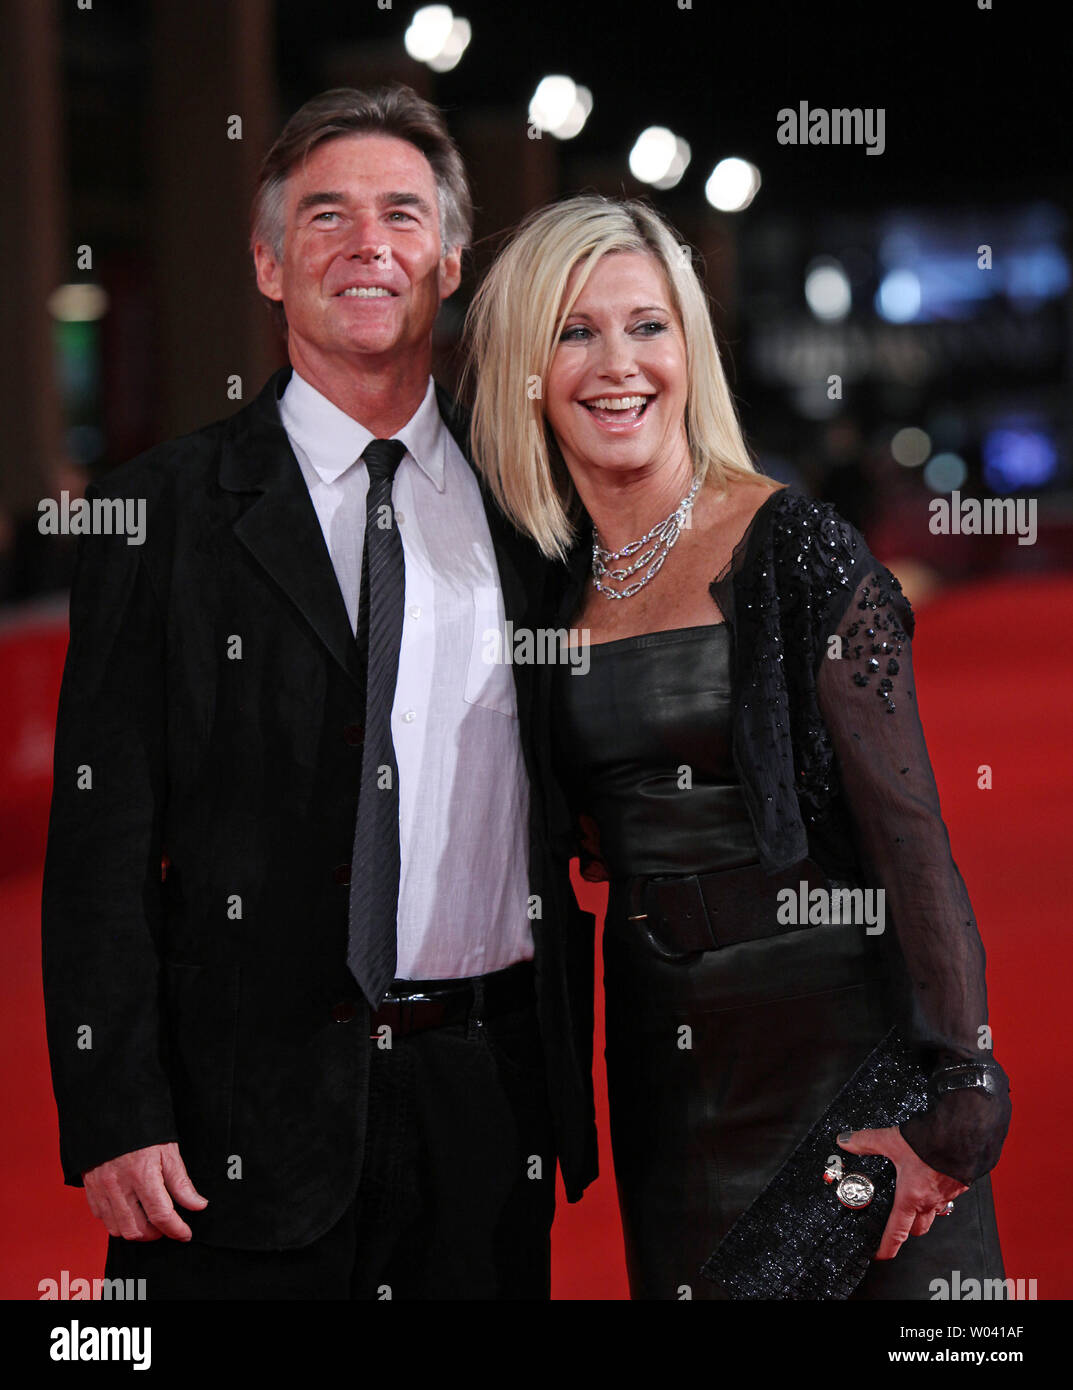 Olivia Newton-John and her husband John Easterling arrive on the red carpet before a screening of the film 'A Few Best Men' during the 6th Rome International Film Festival in Rome on October 28, 2011.   UPI/David Silpa Stock Photo